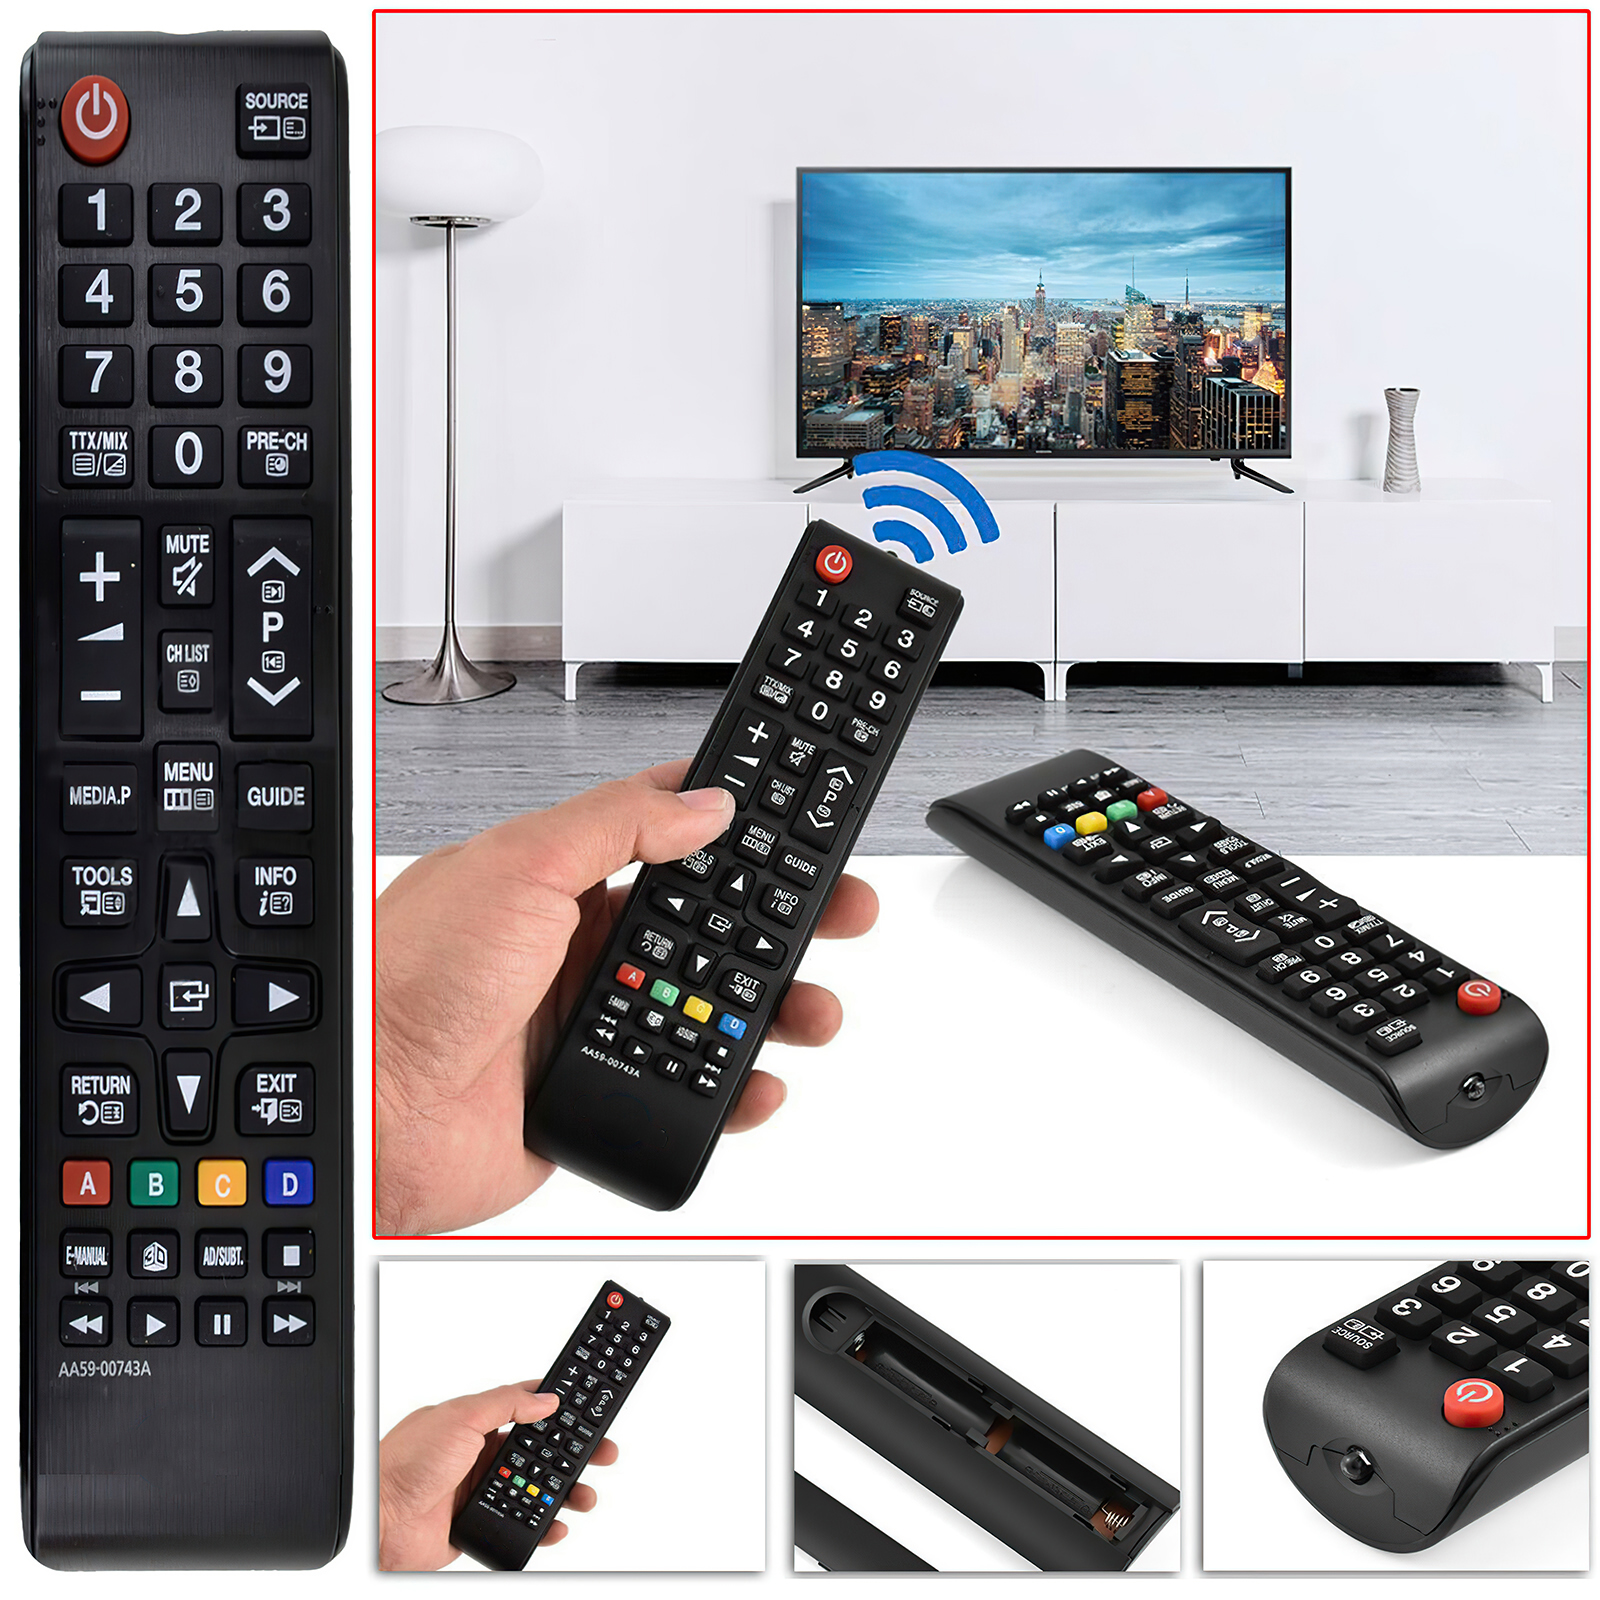 Universal Remote Control for Samsung Series 6-7-8 Smart LED TVs